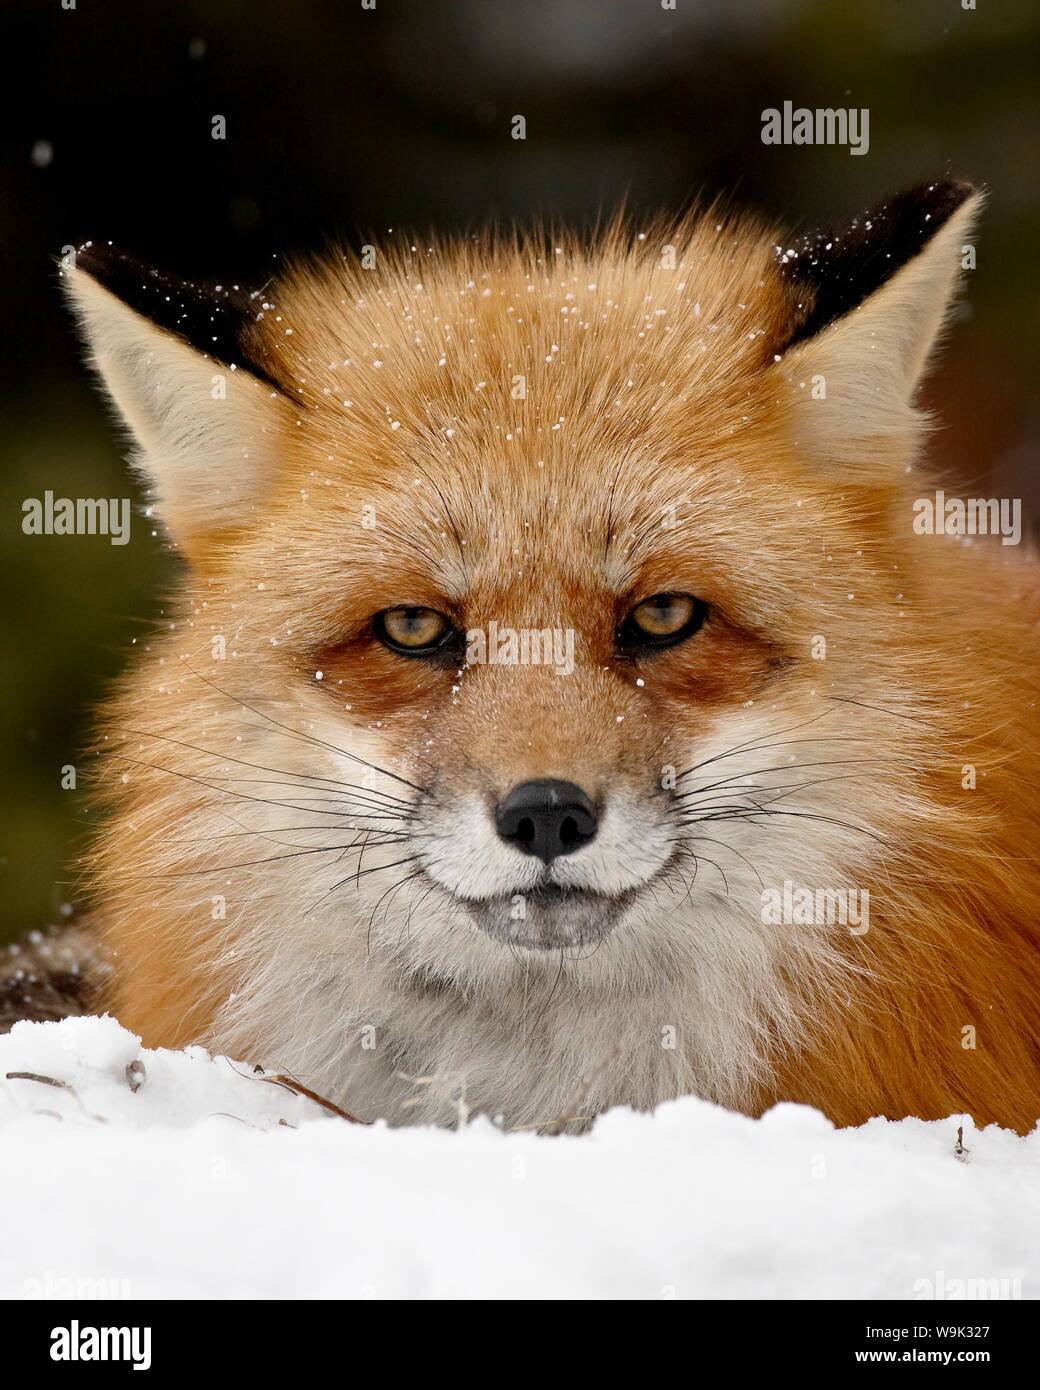 Captive red fox (Vulpes vulpes) in the snow, near Bozeman, Montana, United States of America, North America Stock Photo